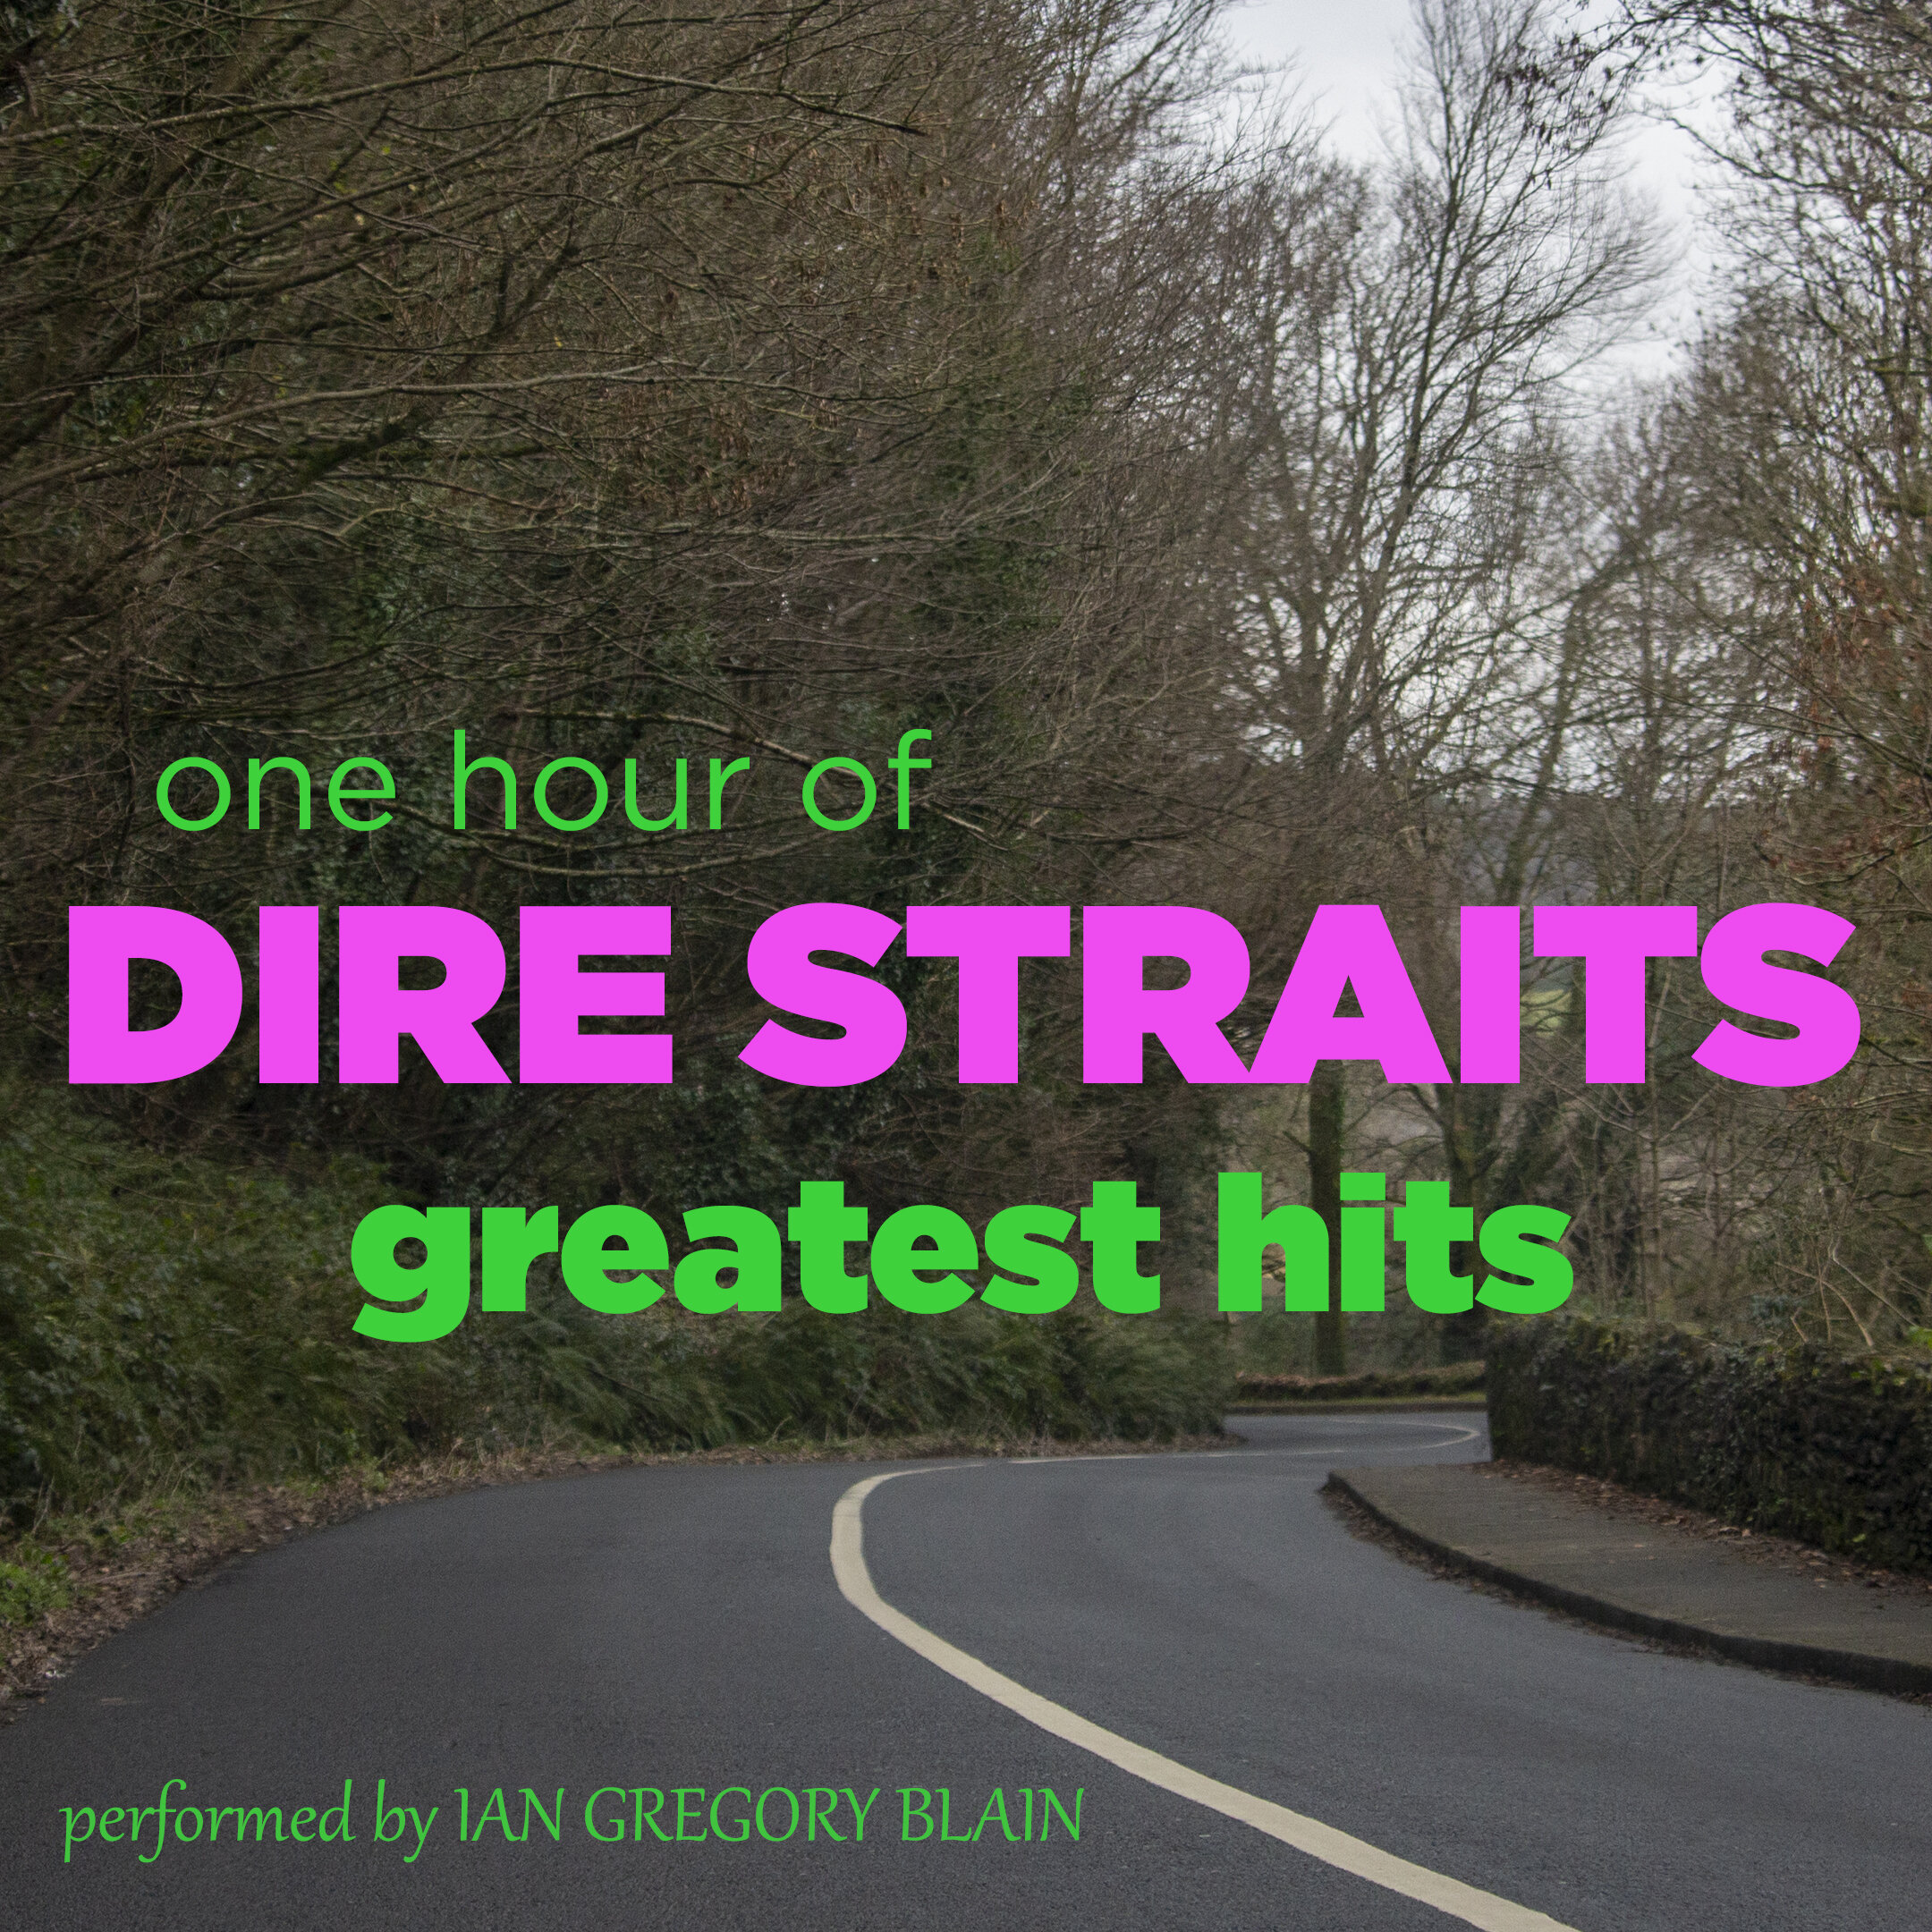 do cd dire straits greatest hits